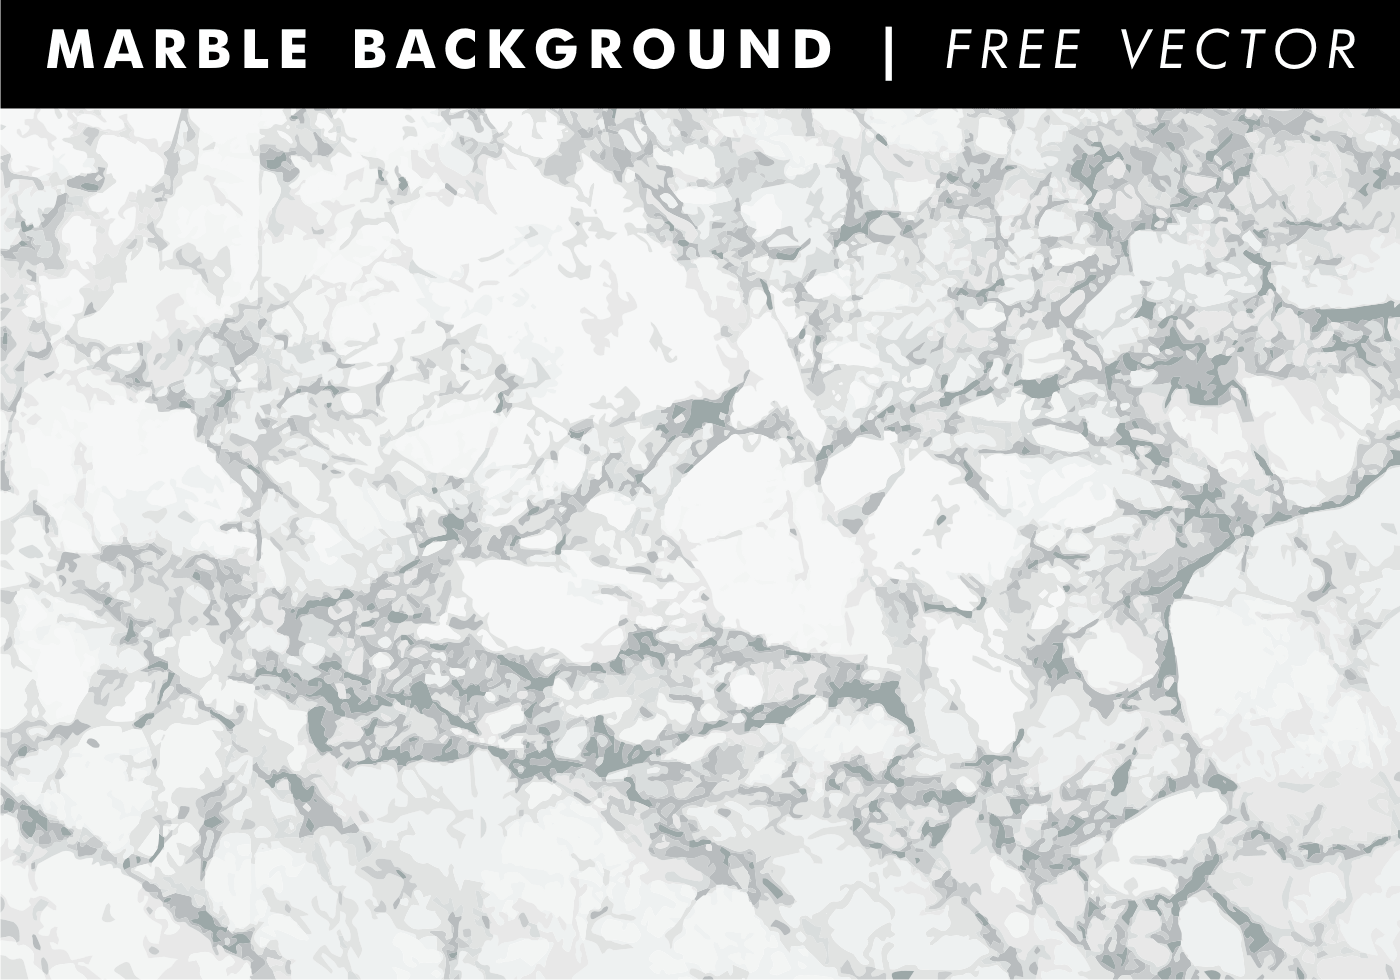 free clip art marble background - photo #17